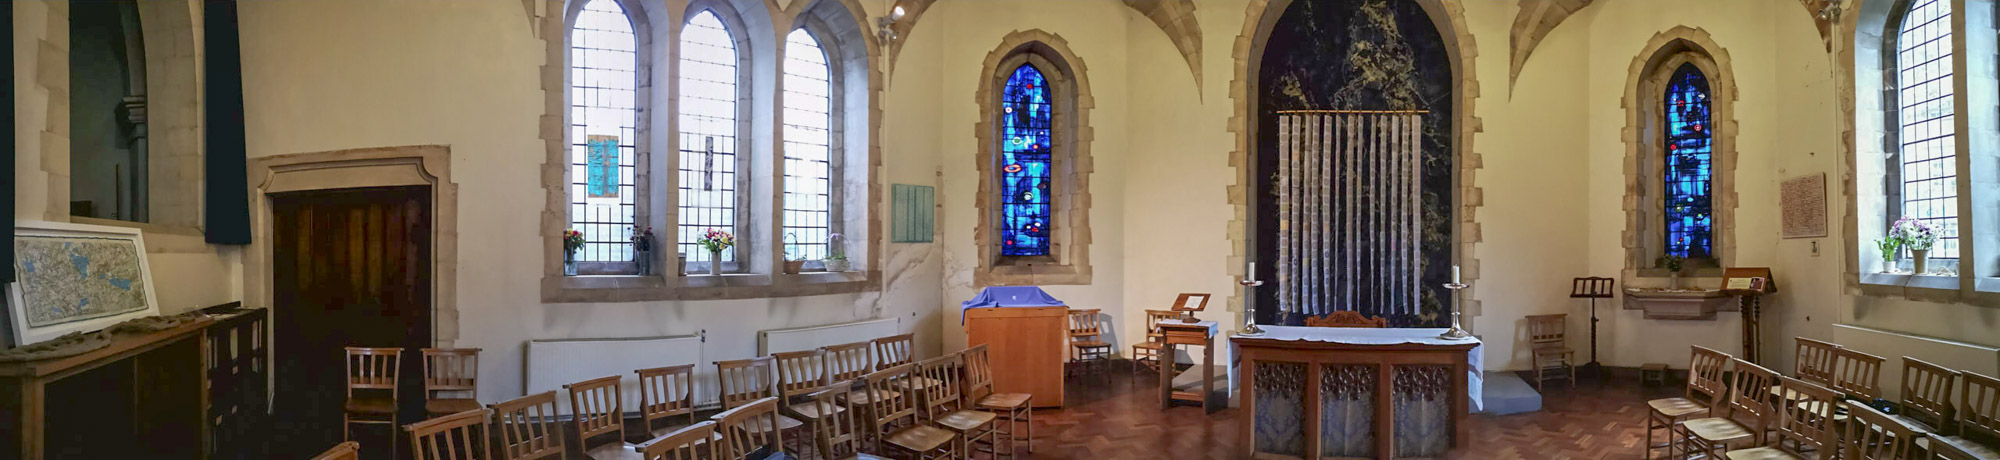 panorama image of exhibition Re-Making Maps of the Mind: Medieval and Modern Journey in St Marys Church Swansea